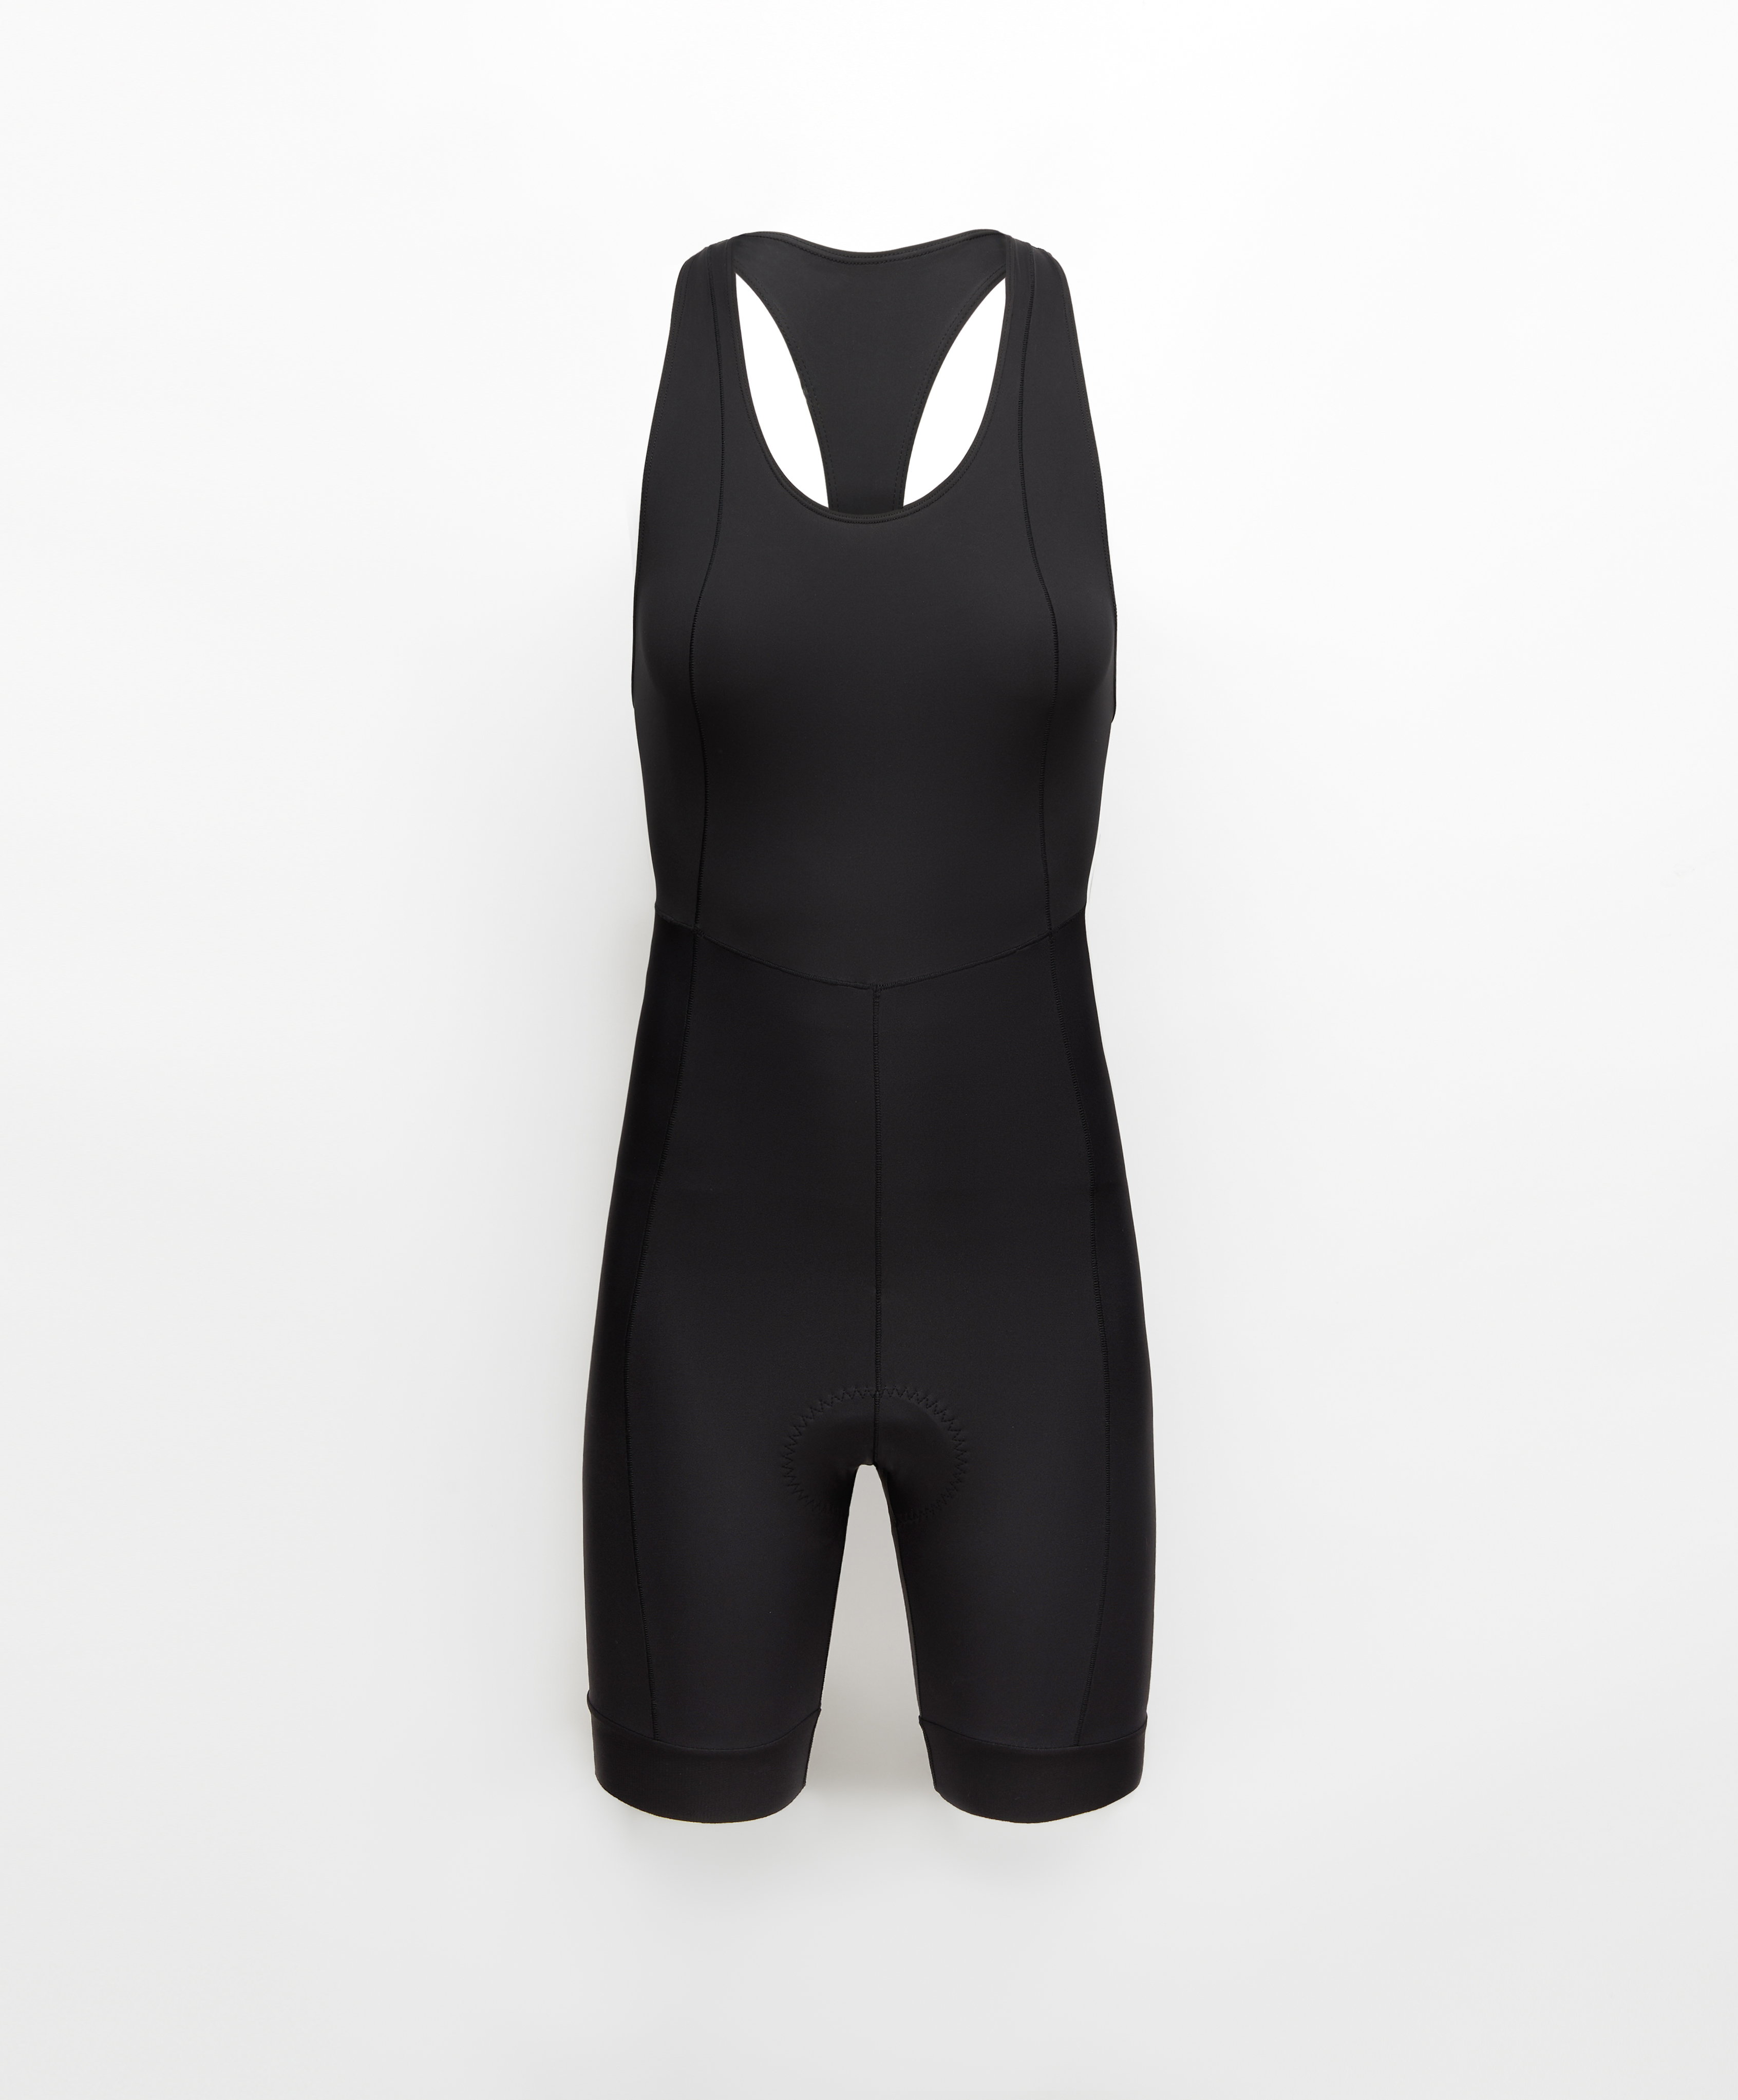 Cycling short one-piece with straps